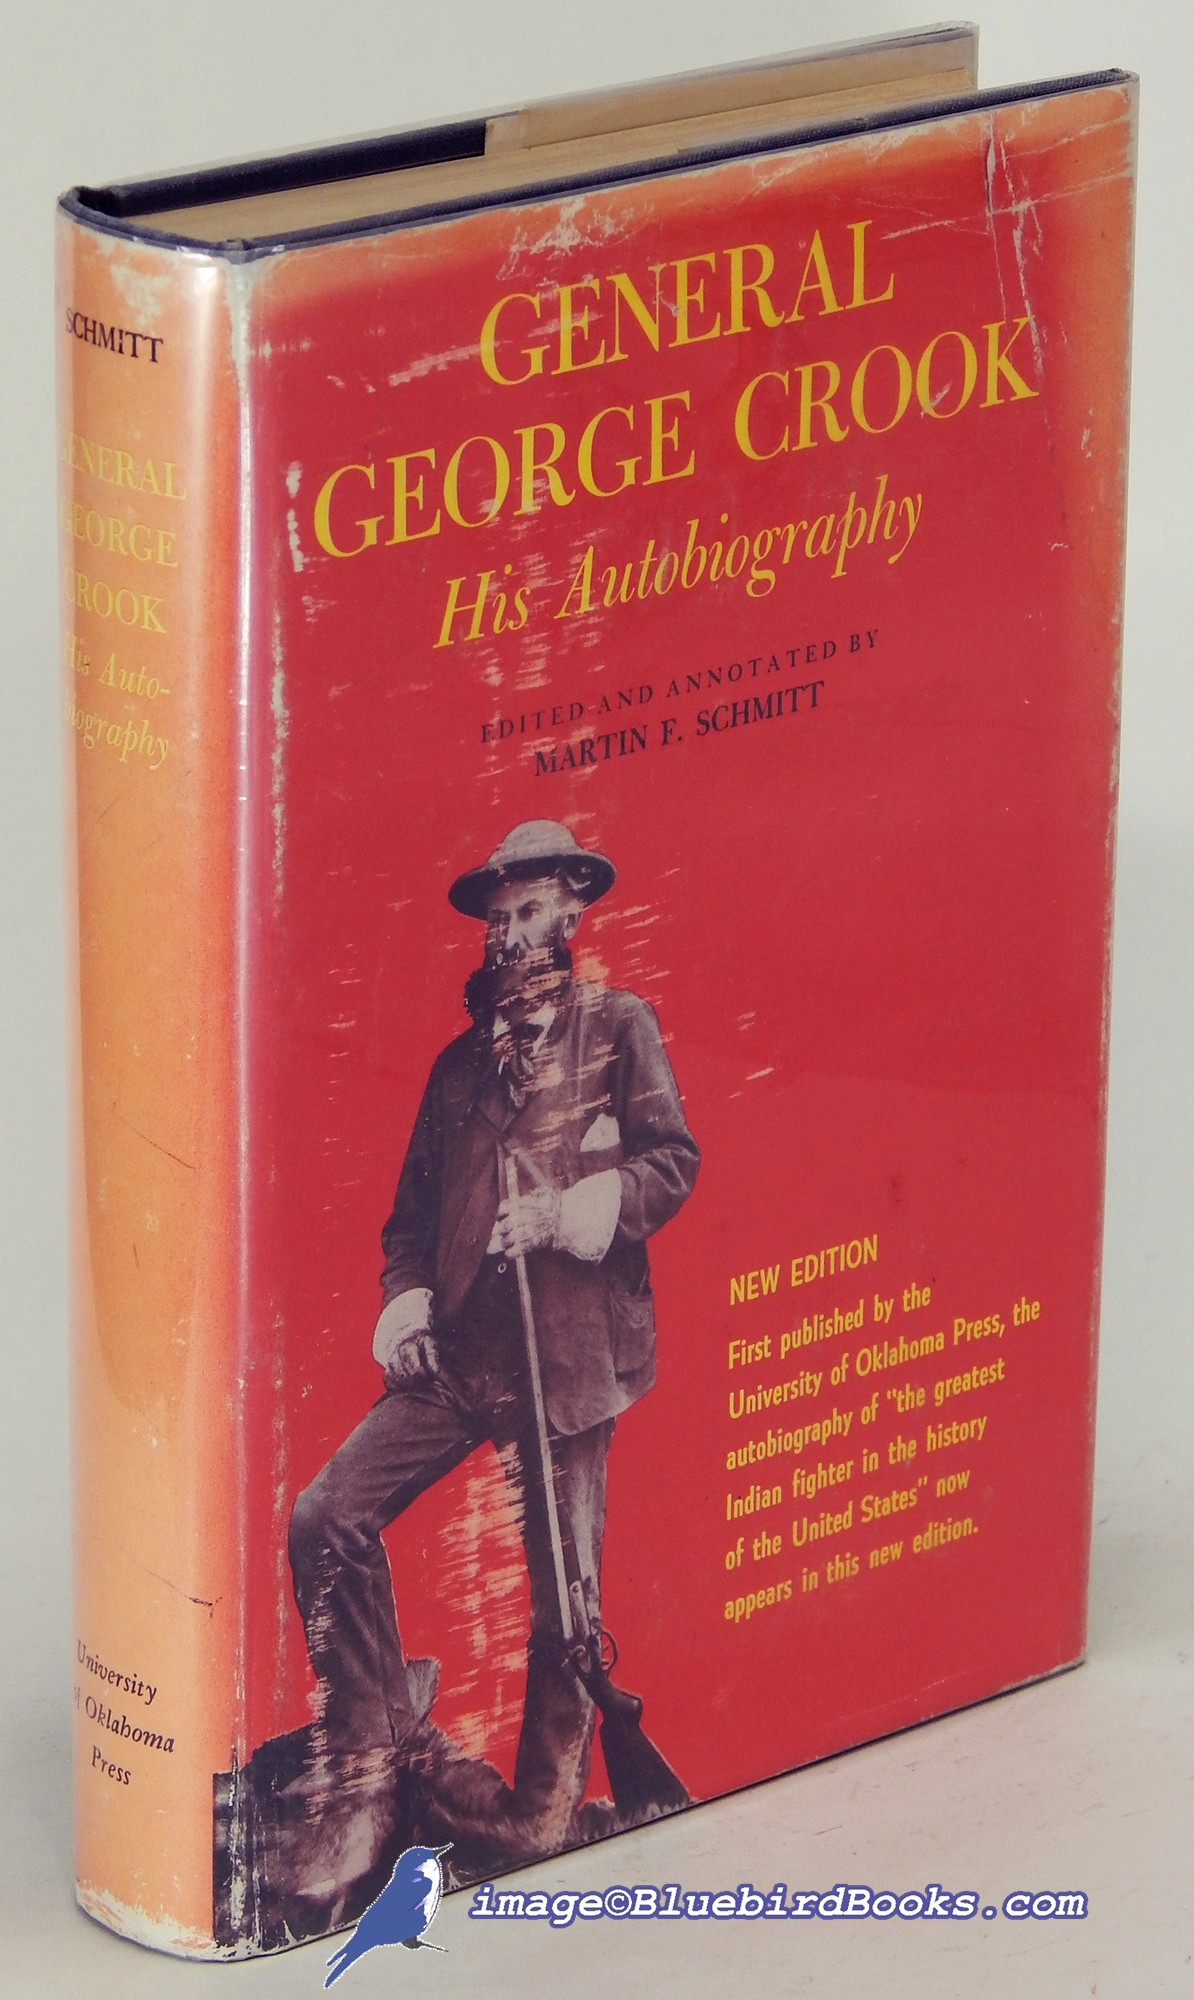 CROOK, GENERAL GEORGE; SCHMITT, MARTIN F. (EDITED AND ANNOTATED BY) - General George Crook: His Autobiography (New Edition)